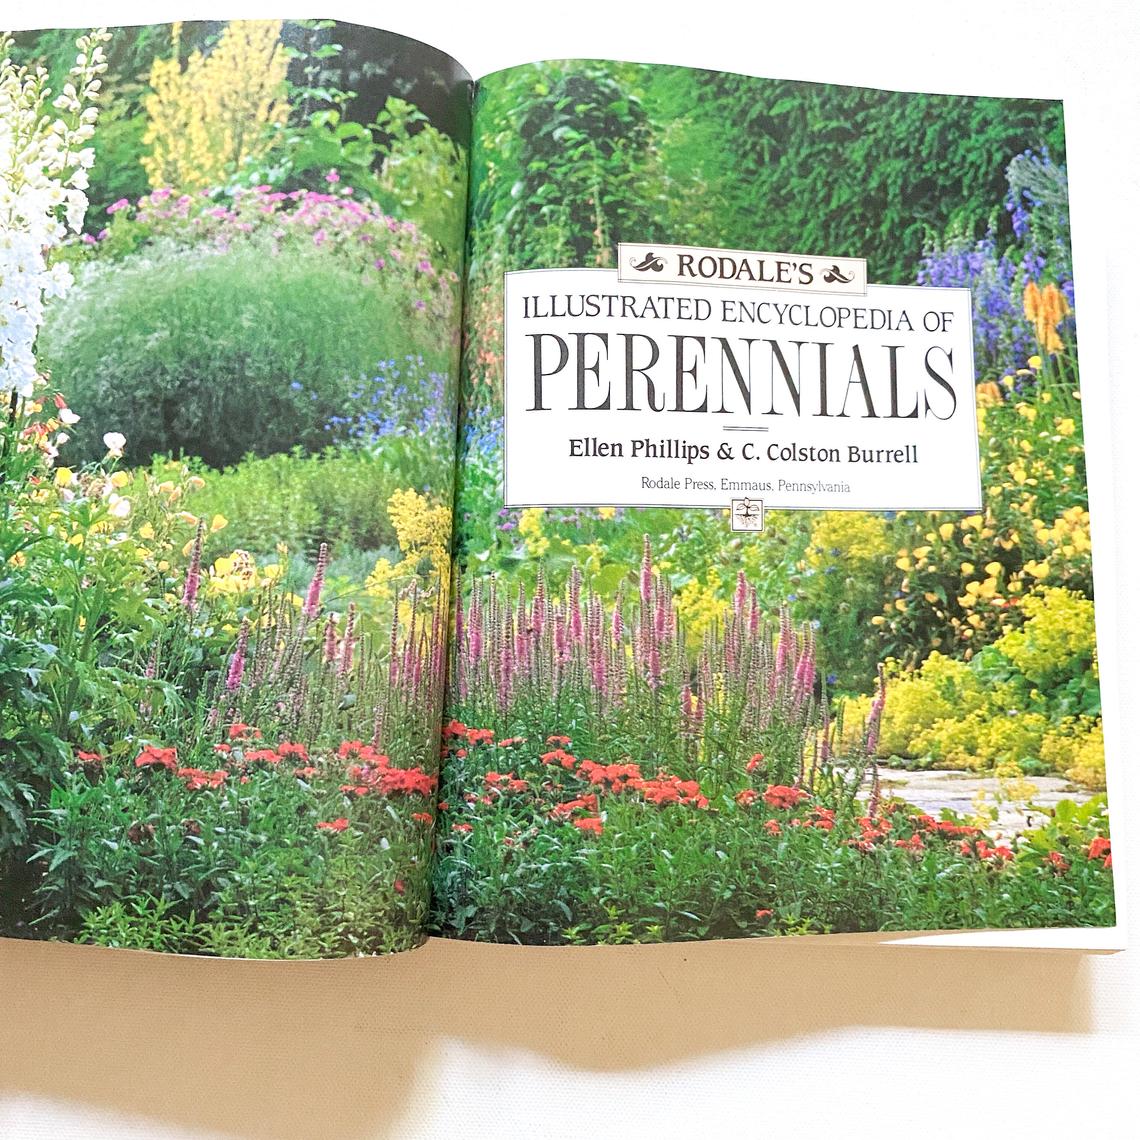 Rodale’s Illustrated Encyclopedia of Perennials, Vintage Gardening Reference Book